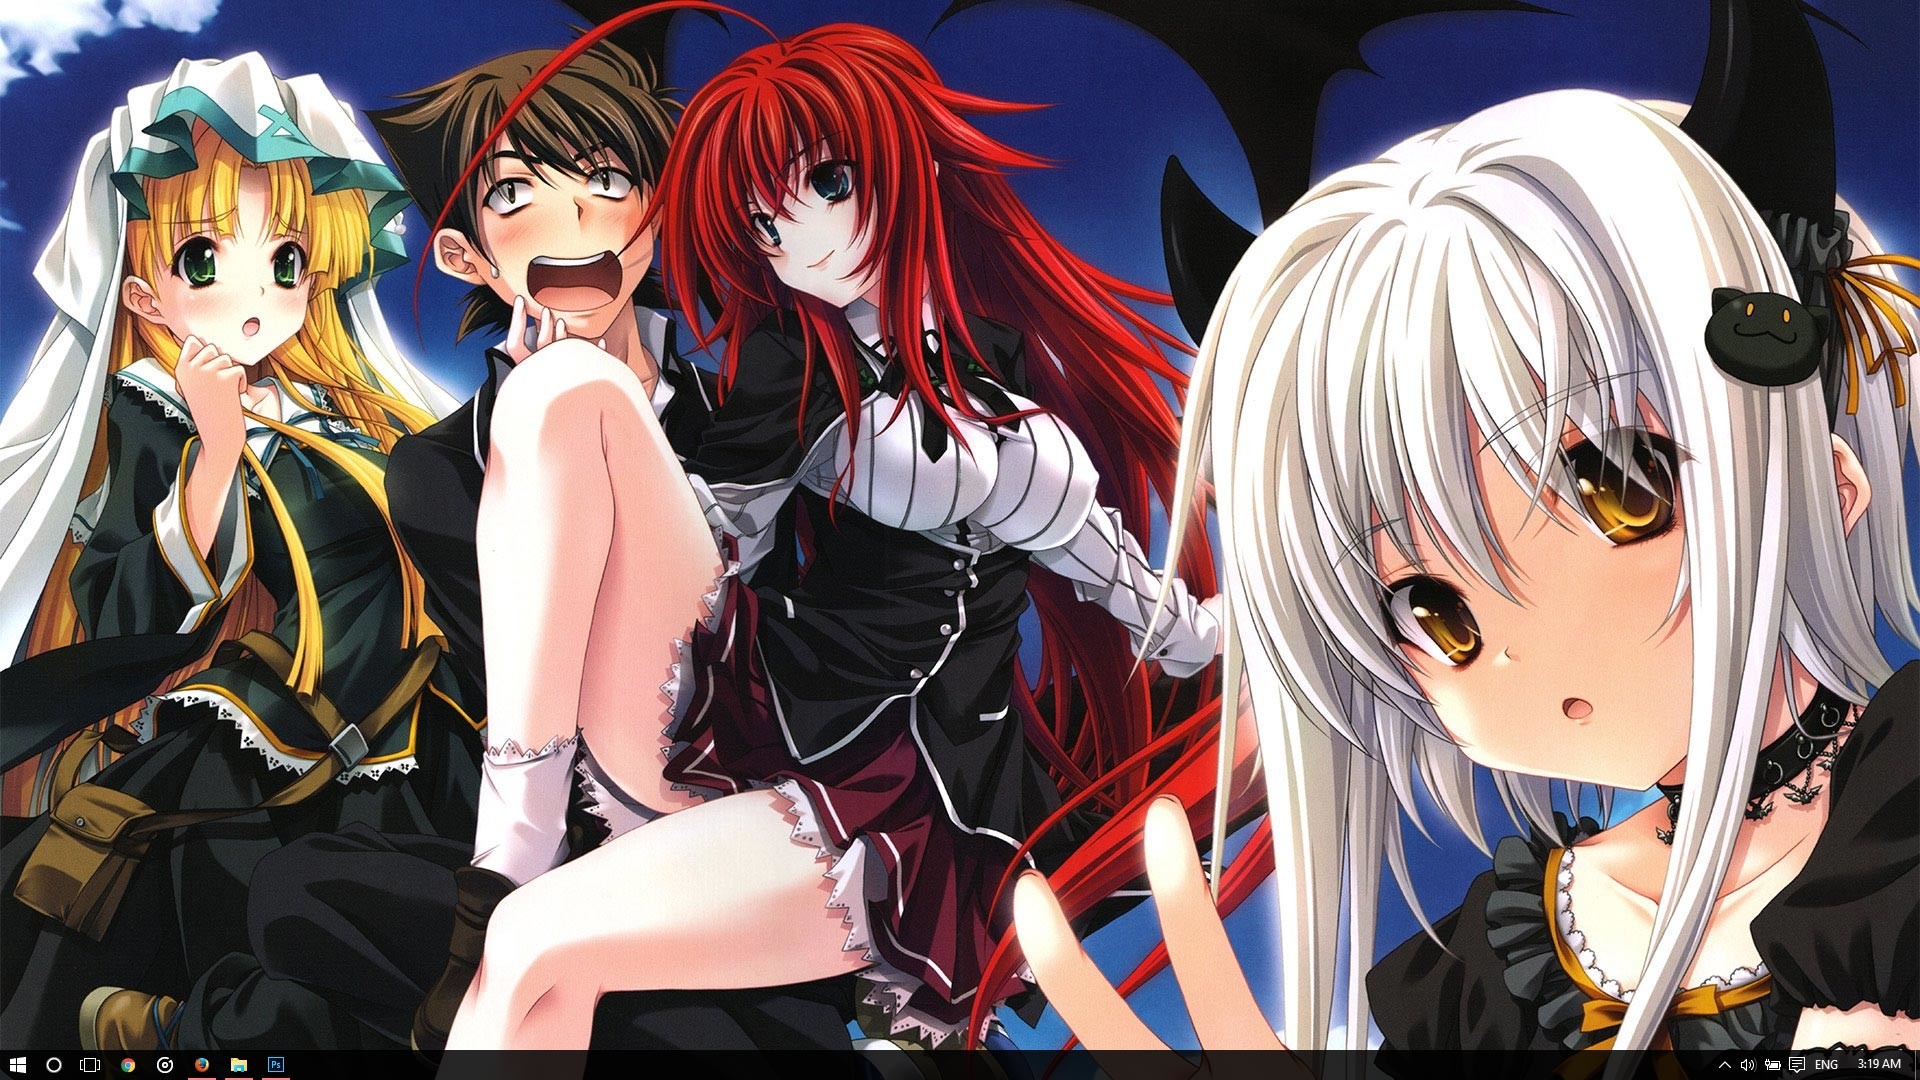 1920x1080 Issei Hyoudou and Rias Gremory together with all the female characters like  Asia, Akeno, Gasper for some individual art work from the anime make up  this ...